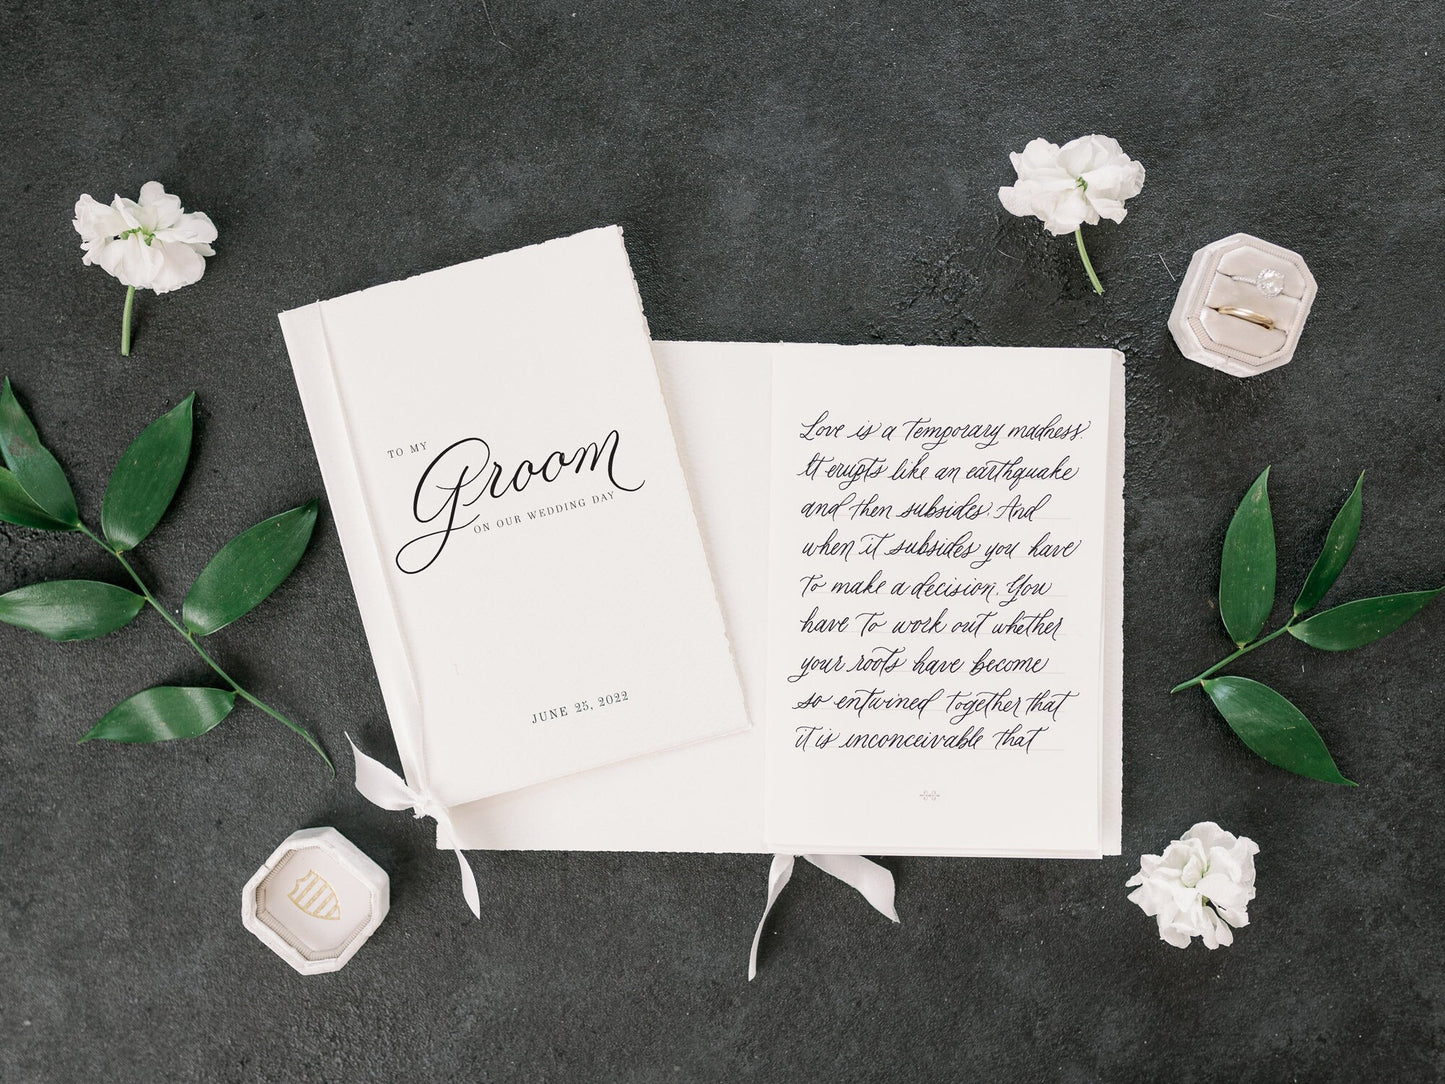 To My Groom on our Wedding Day Card and Vow Book